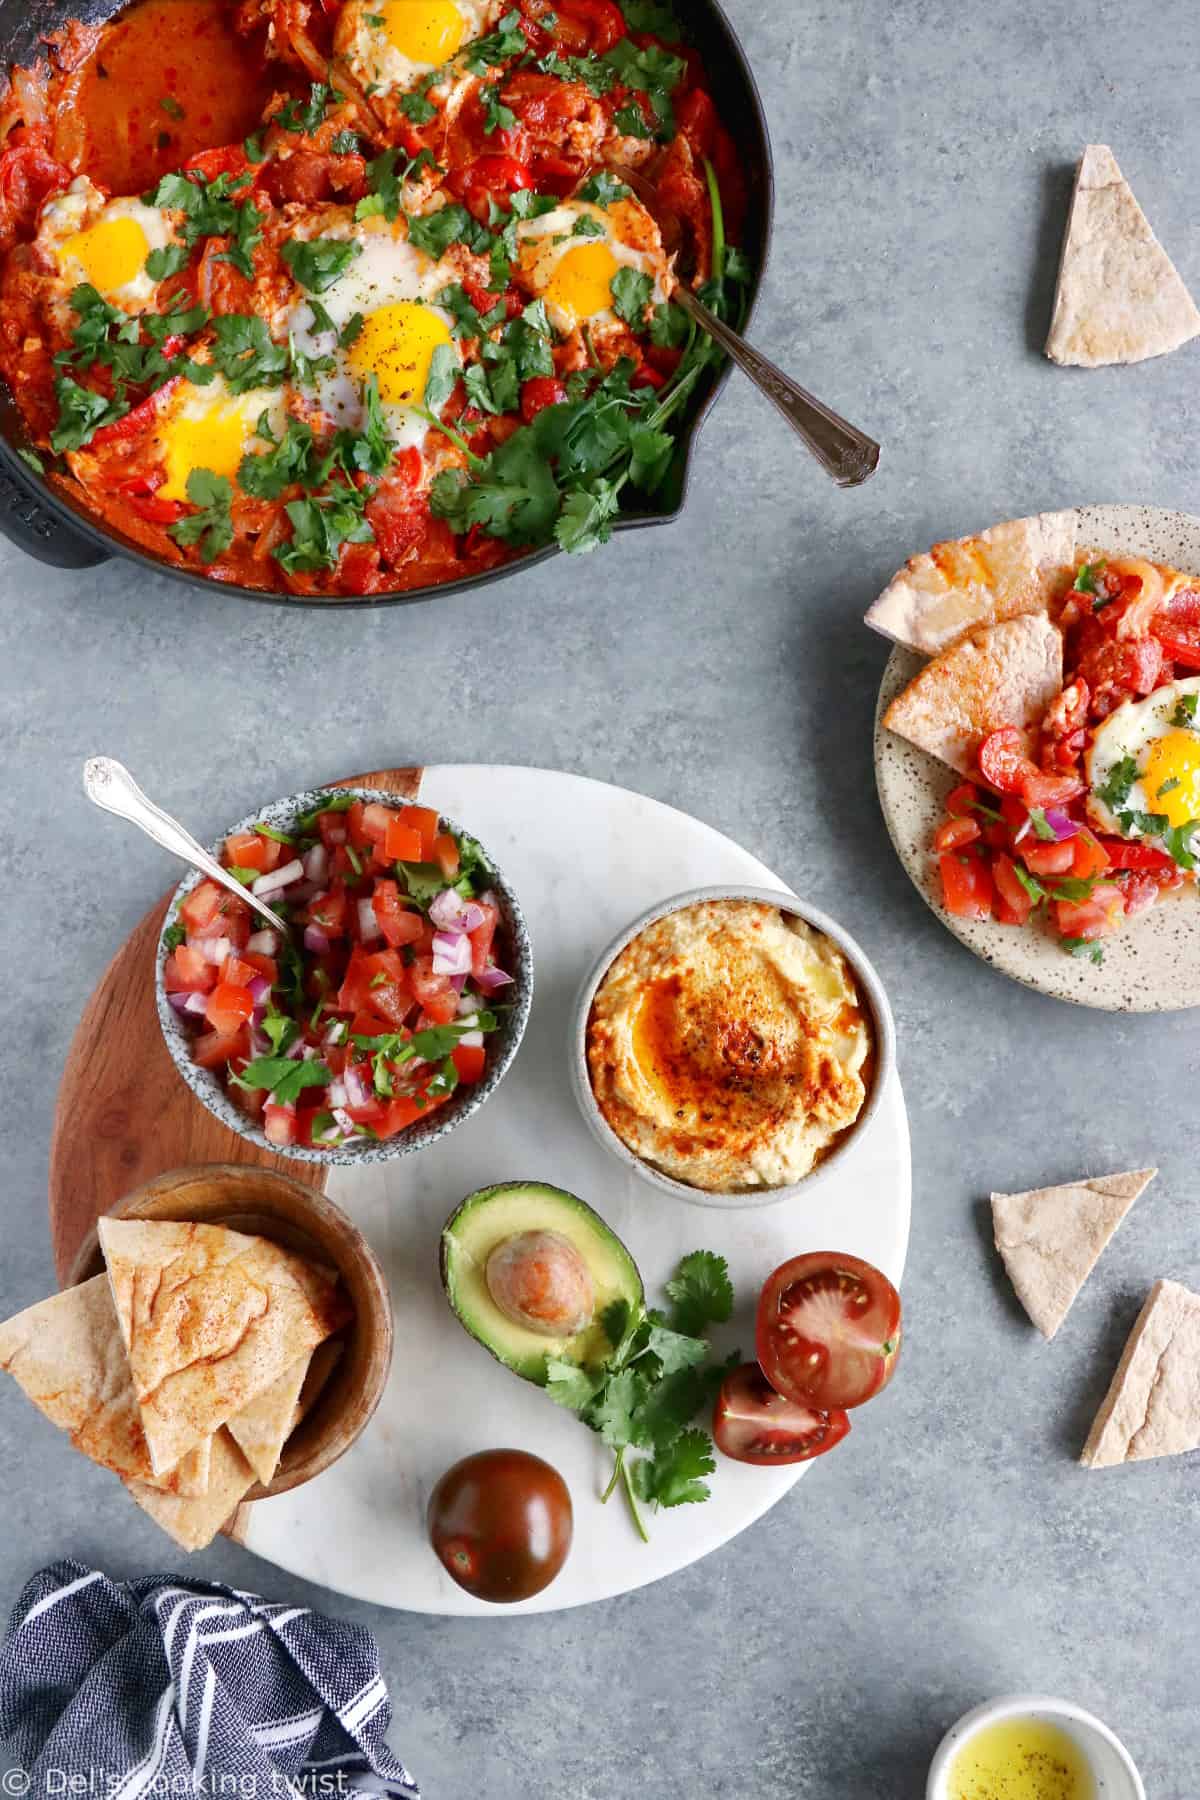 Ever wondered how to serve a shakshuka? Place it in the center of the table and serve with various small plates, breads and salads to make this meal a feast!